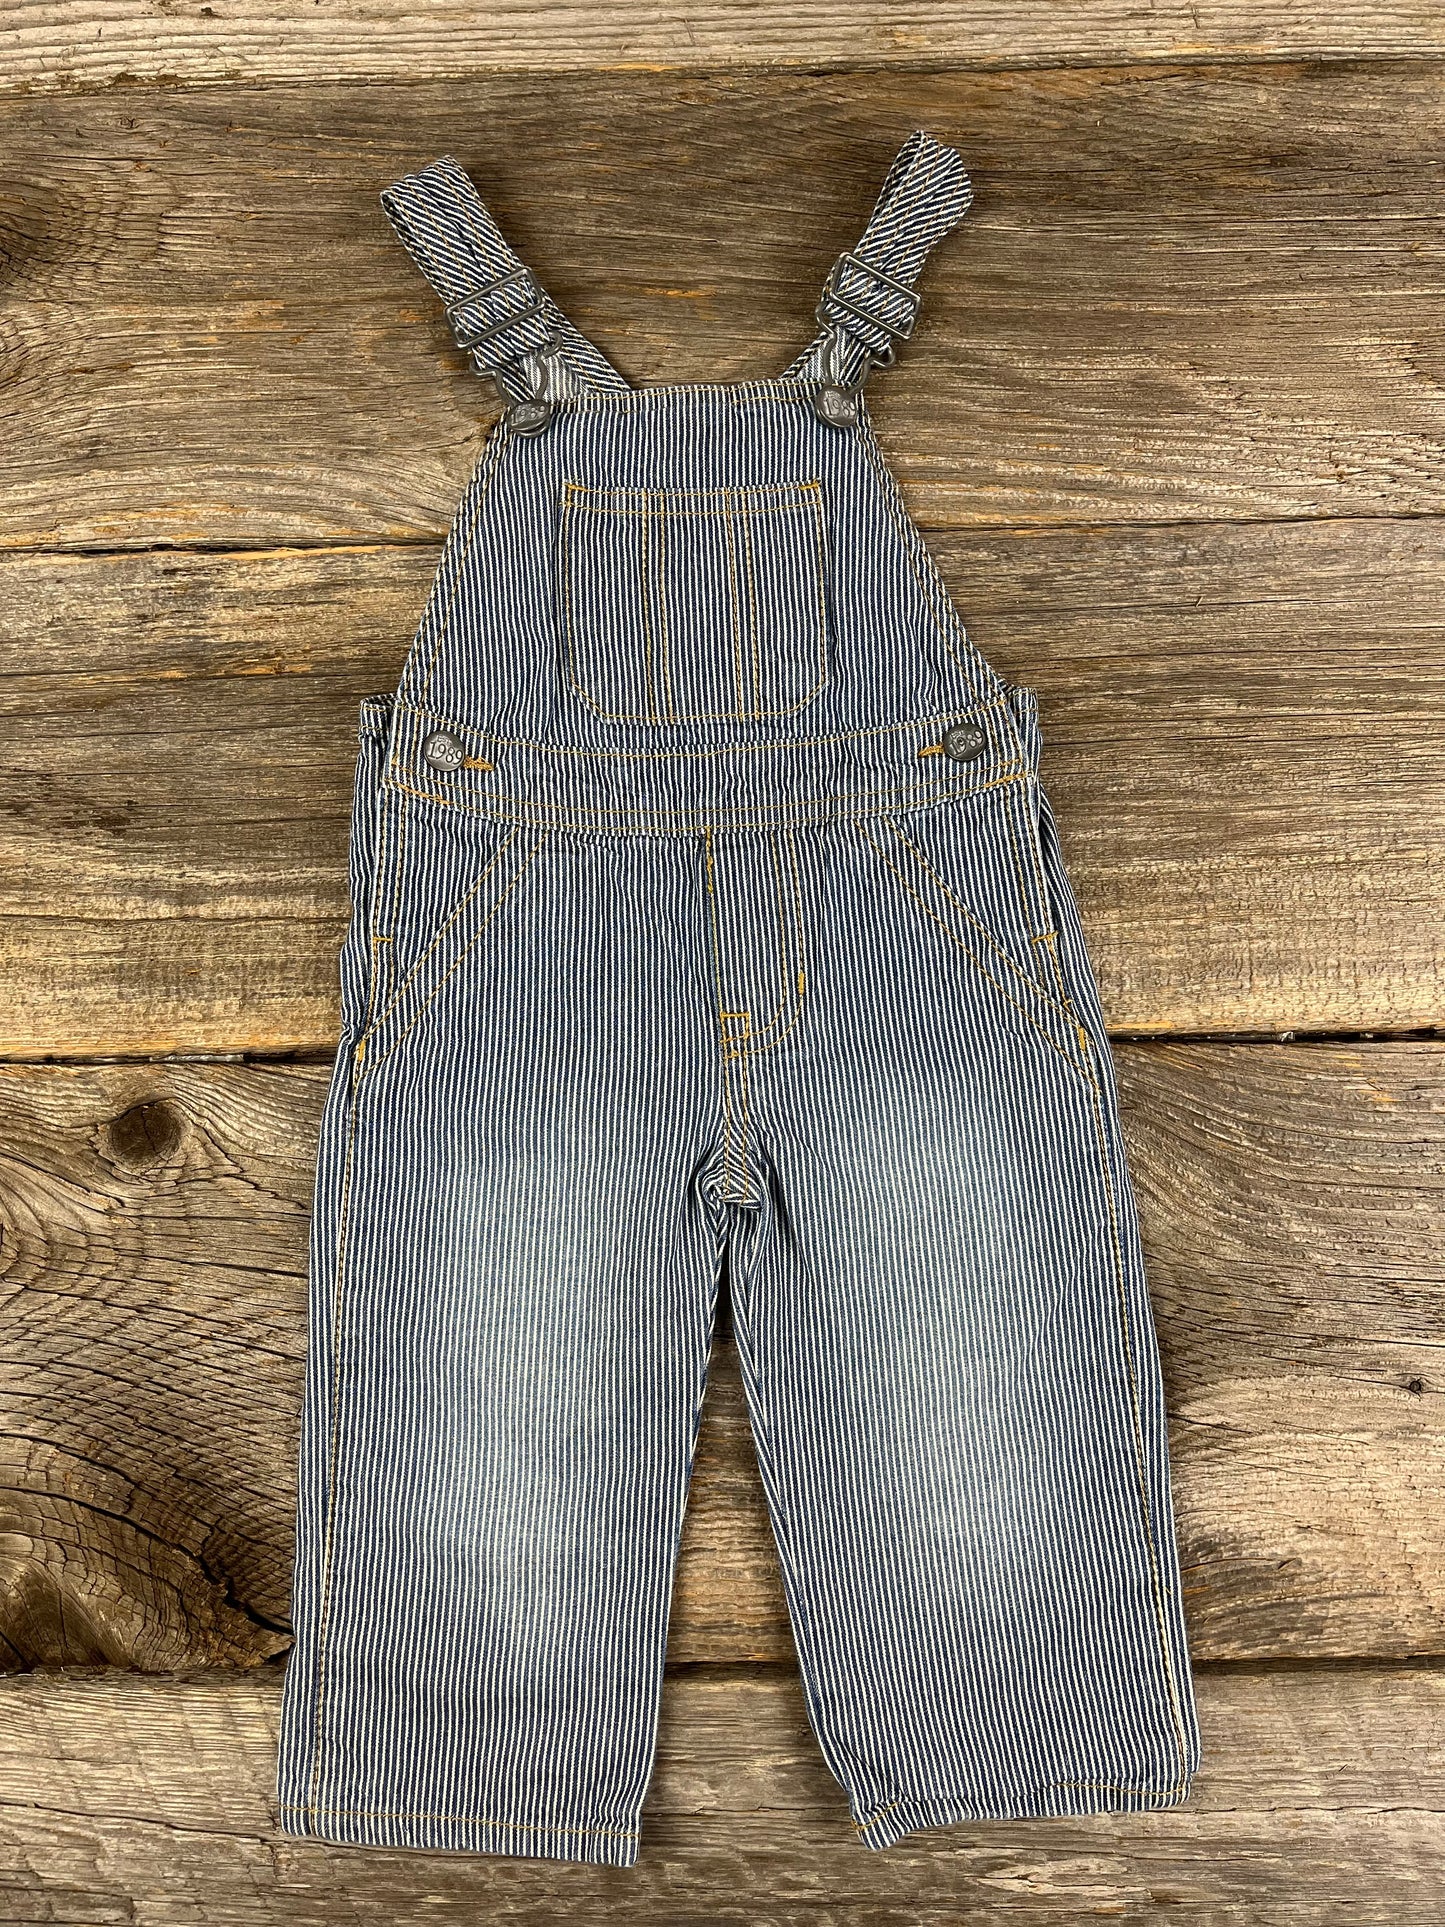 The Children’s Place 9-12M Overalls